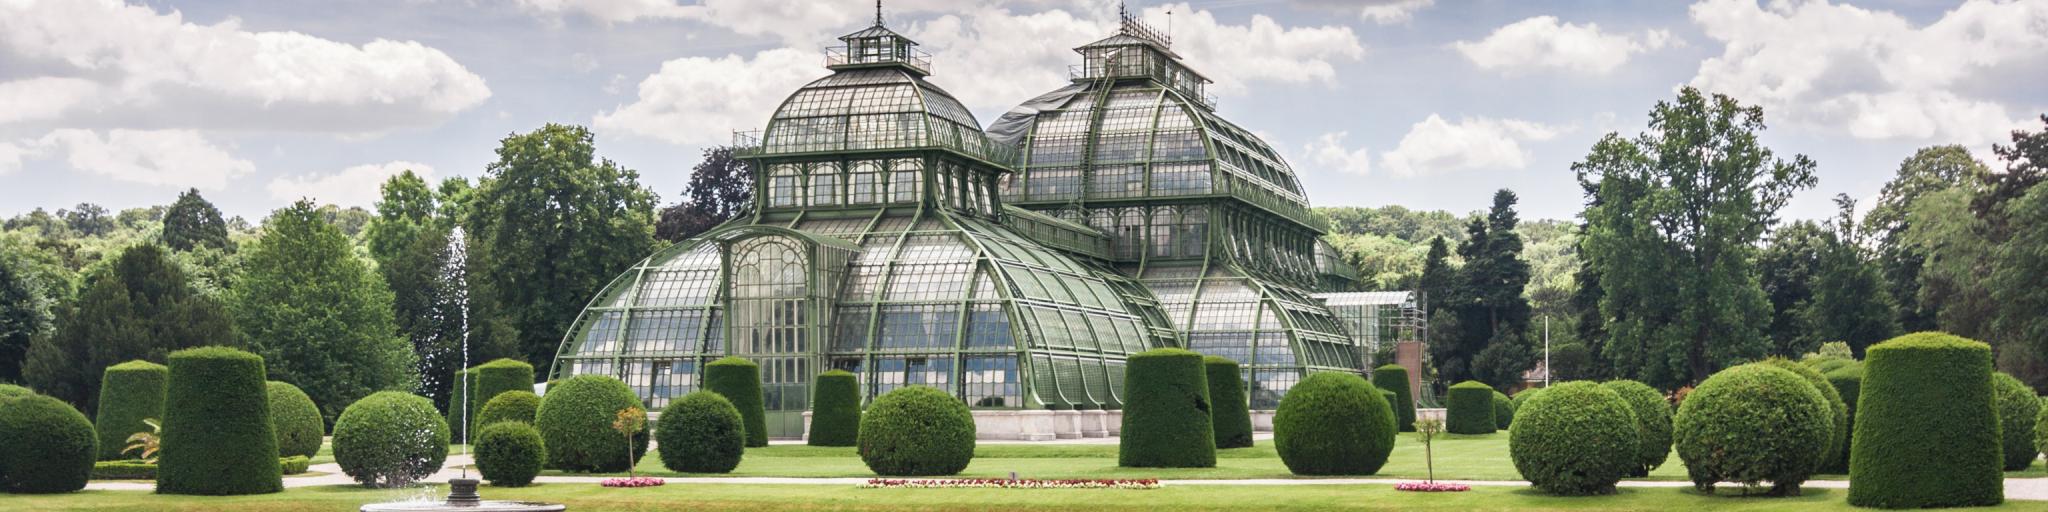 The ultimate weekend in Vienna at the Palmenhaus park